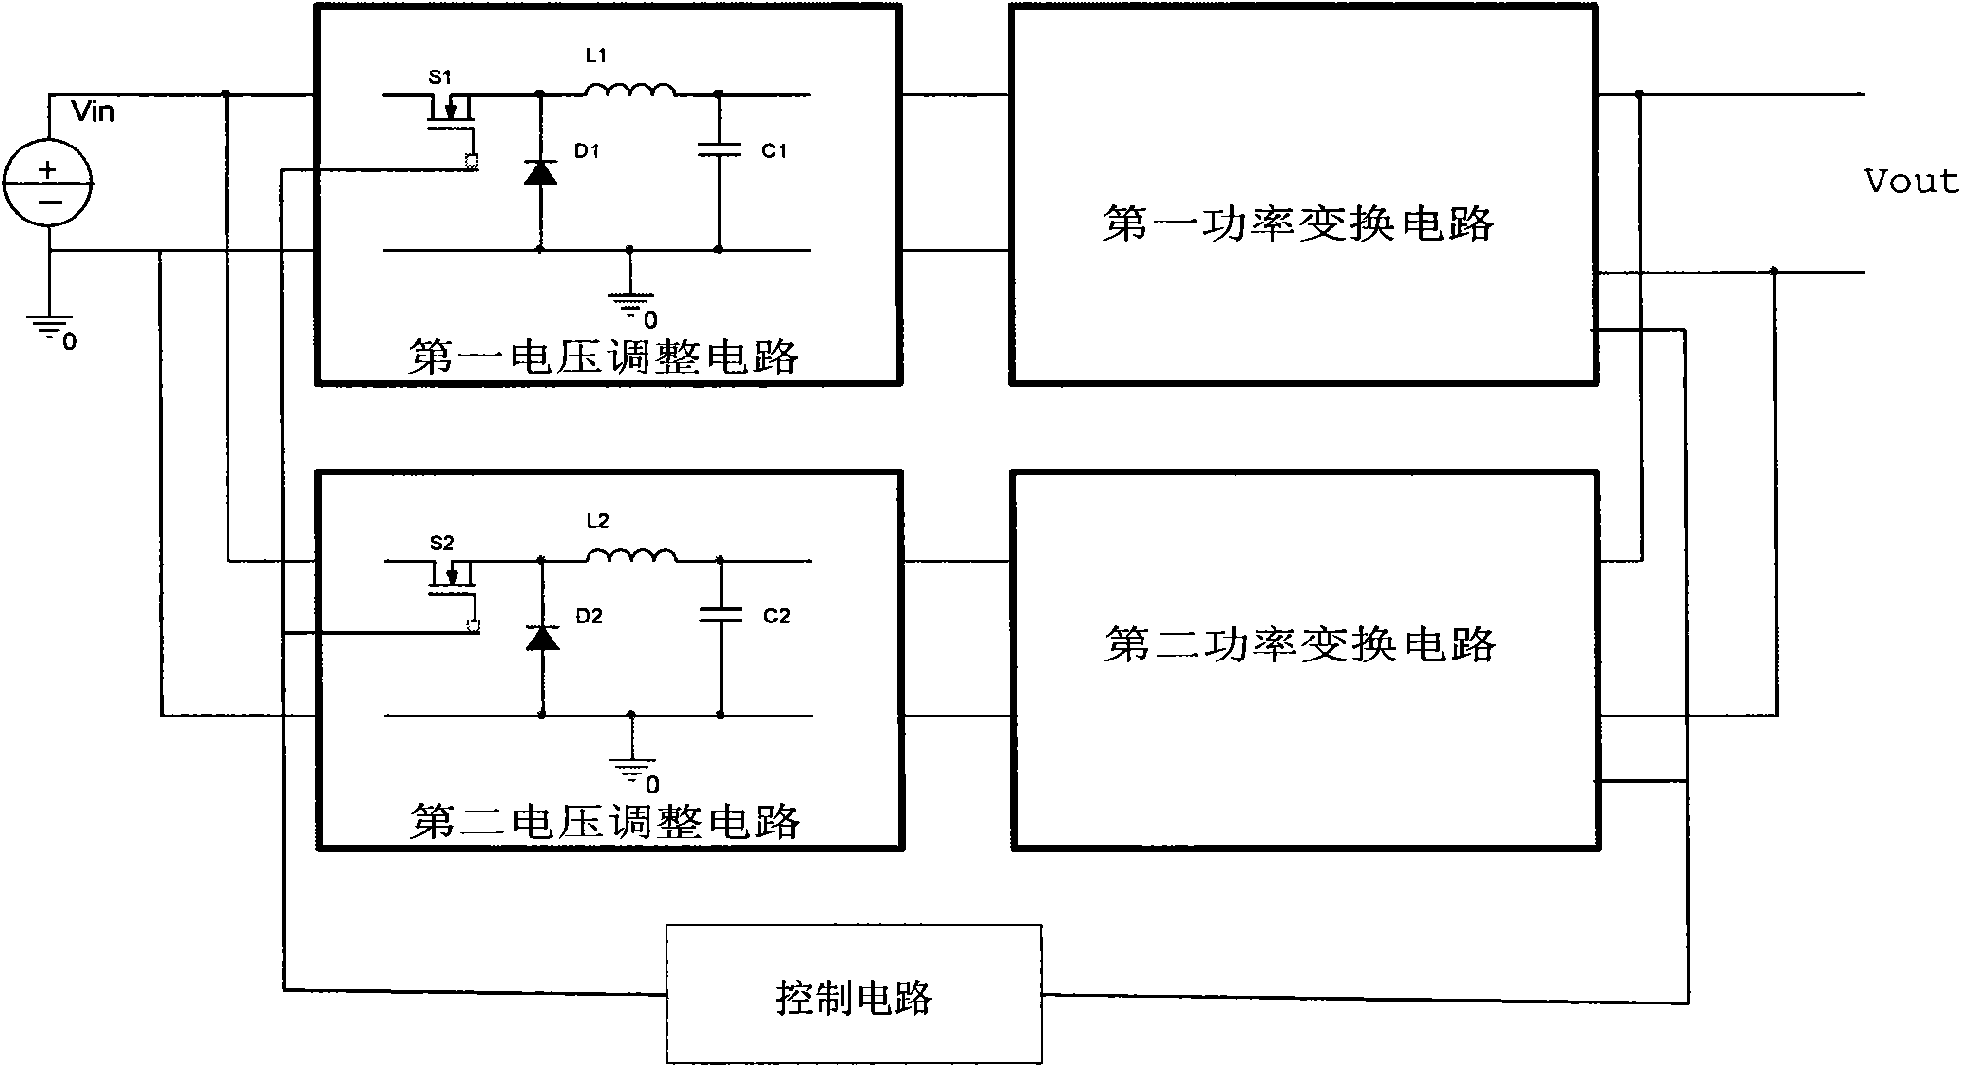 Power conversion units connected in parallel